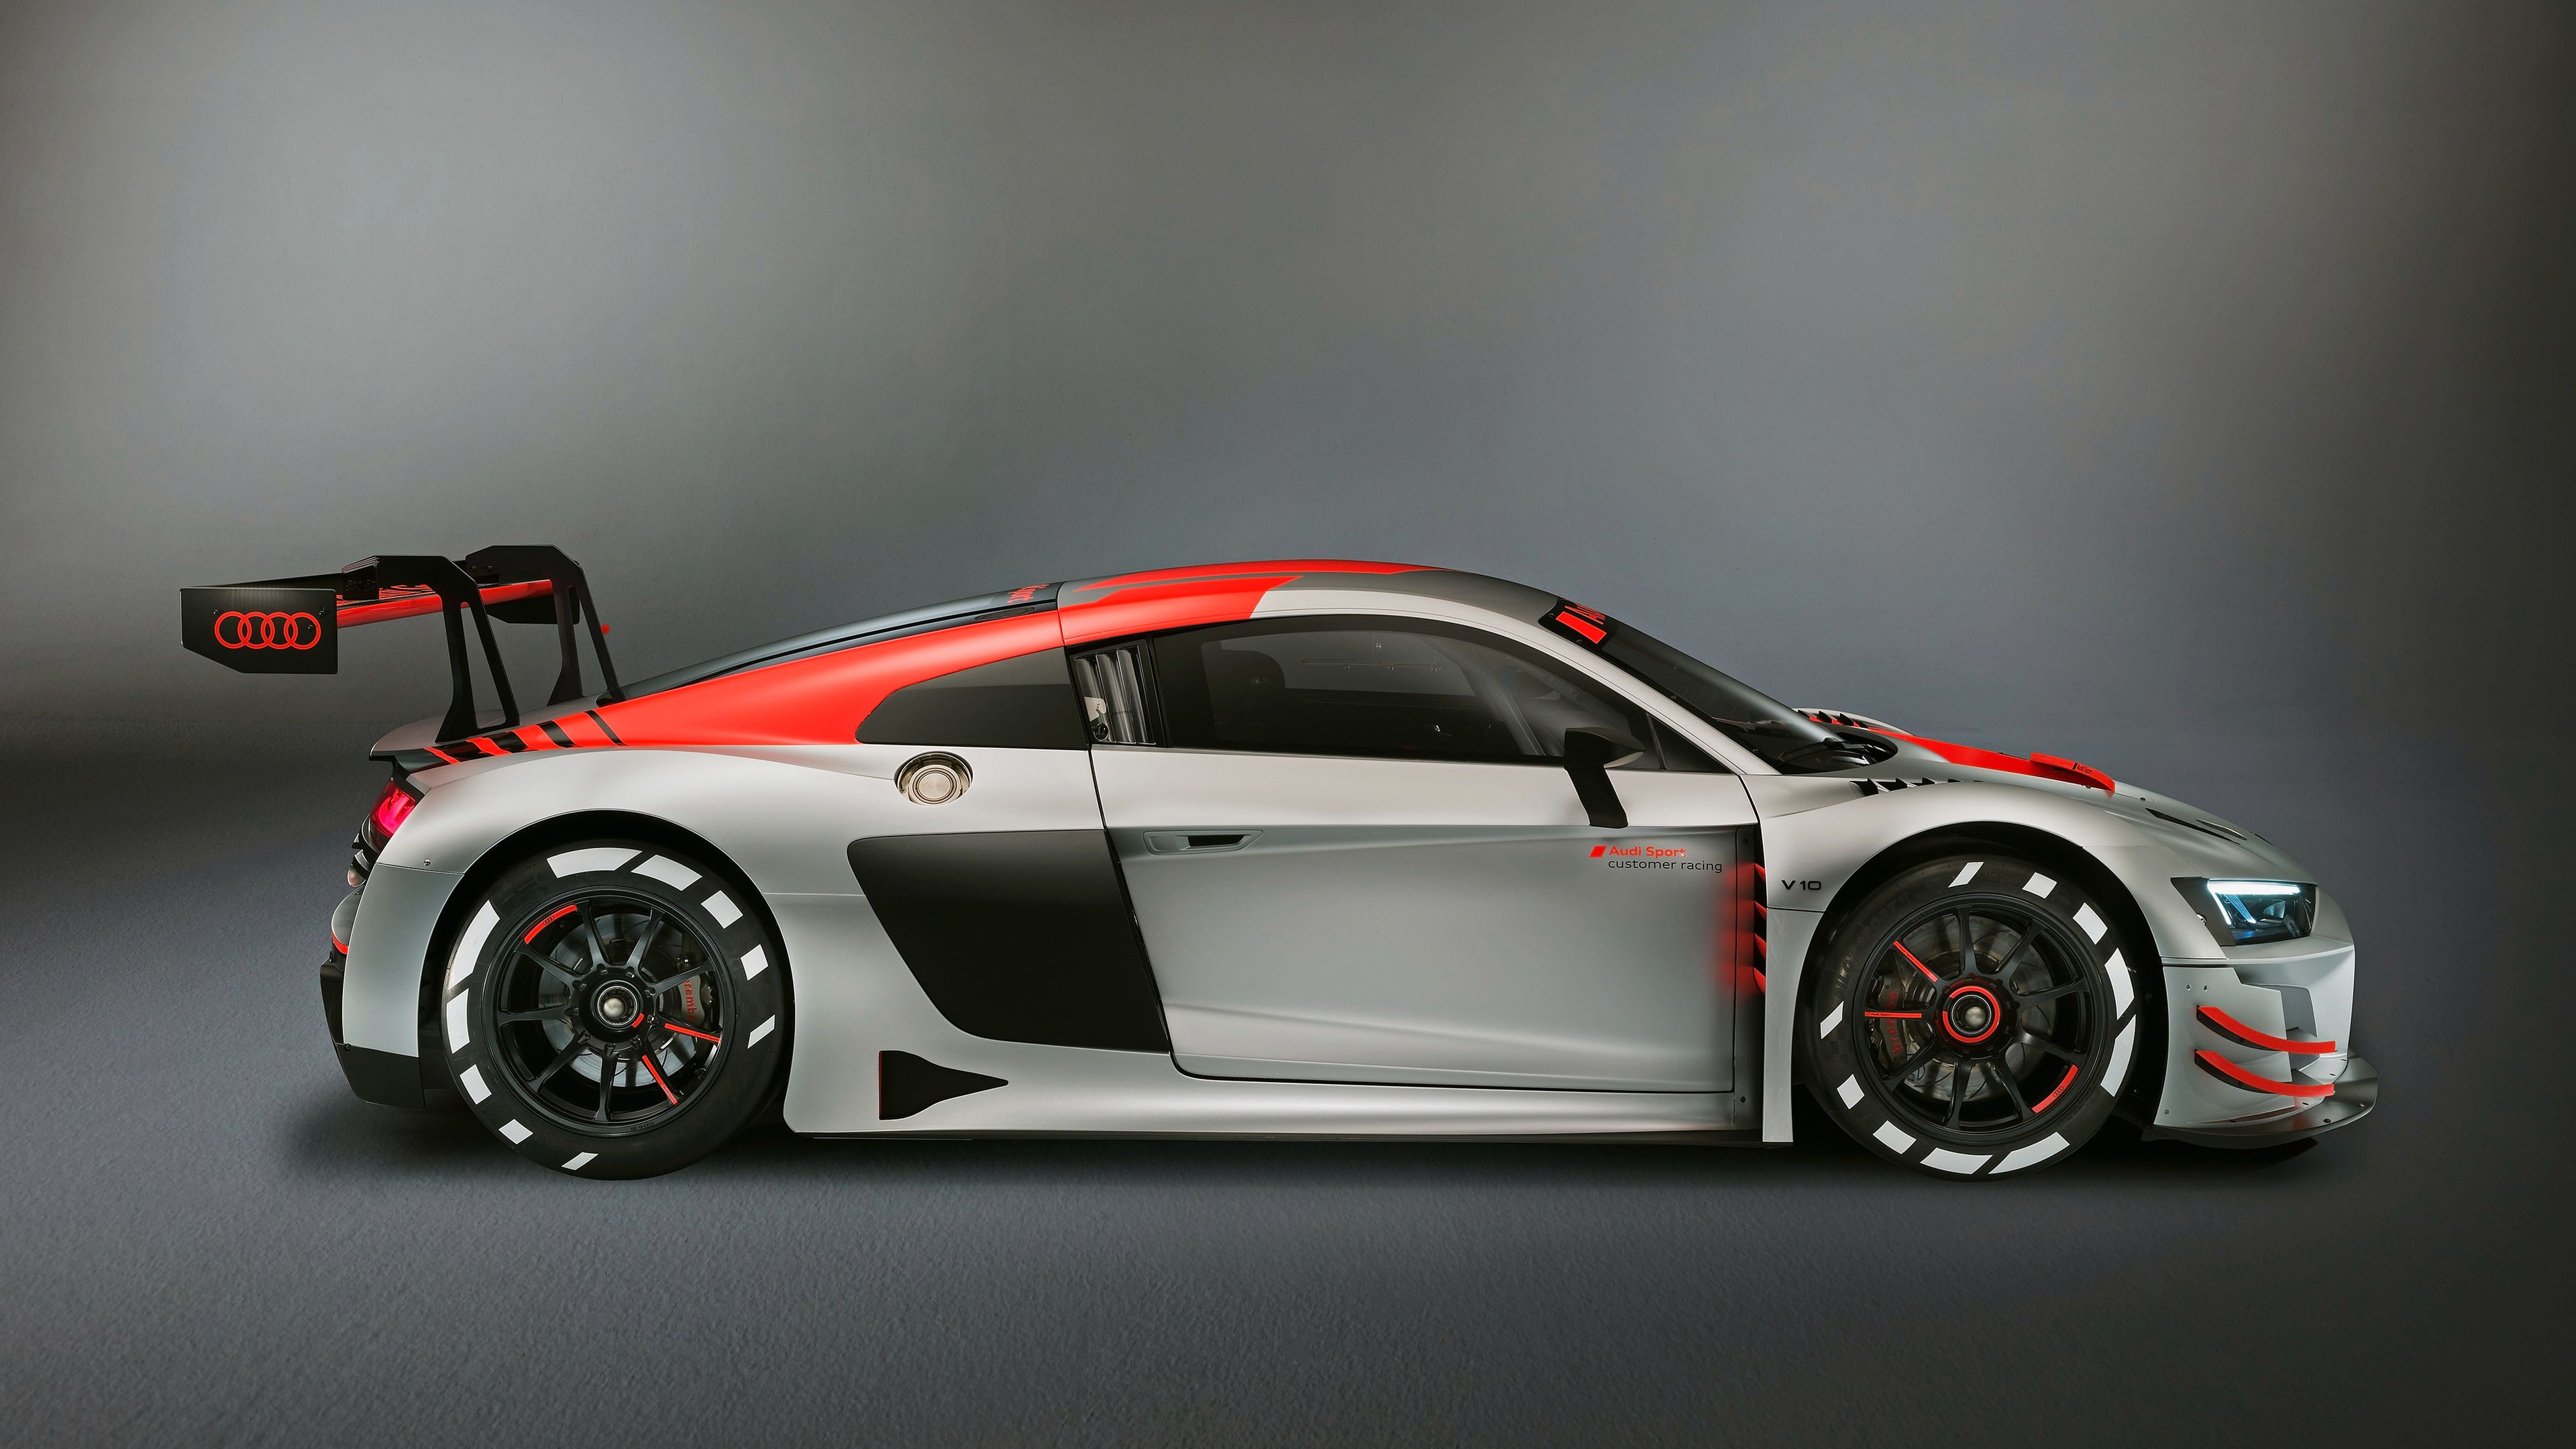 2019 Audi R8 LMS Side View 4k hd wallpapers cars wallpapers audi 3840x2160